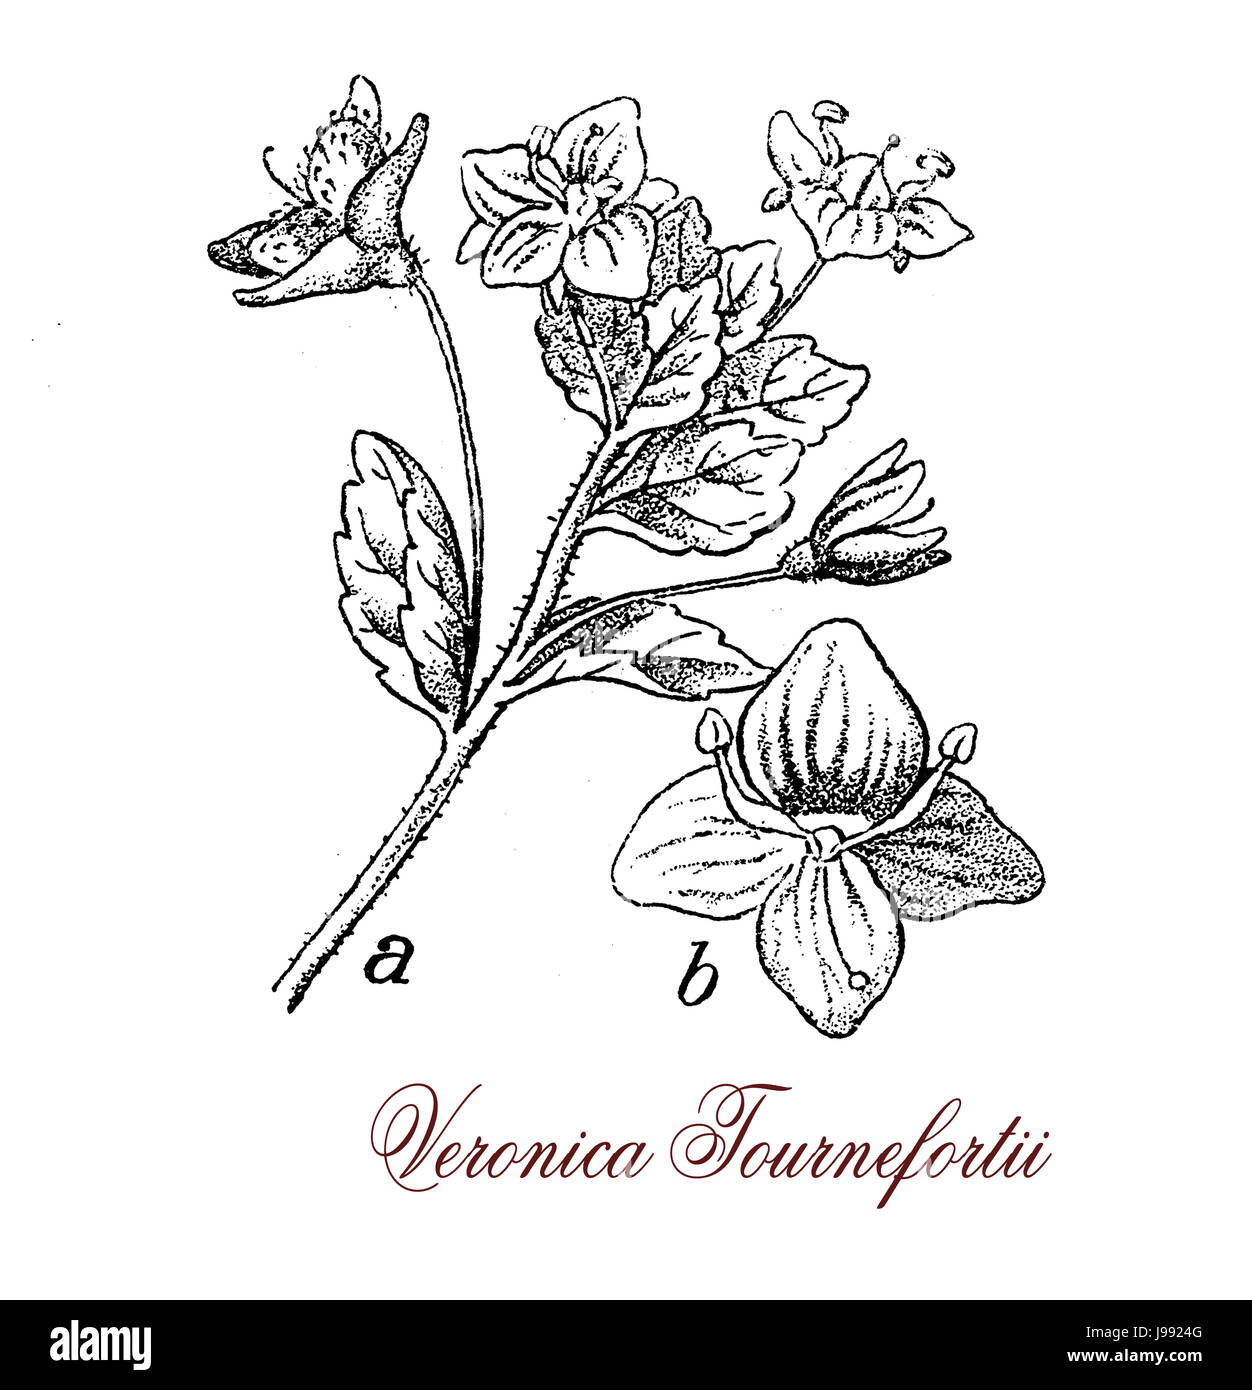 Veronica persica, flowering plant with small sky-blue flowers with dark stripes and white centers and heart-shaped fruits,vintage engraving. Stock Photo